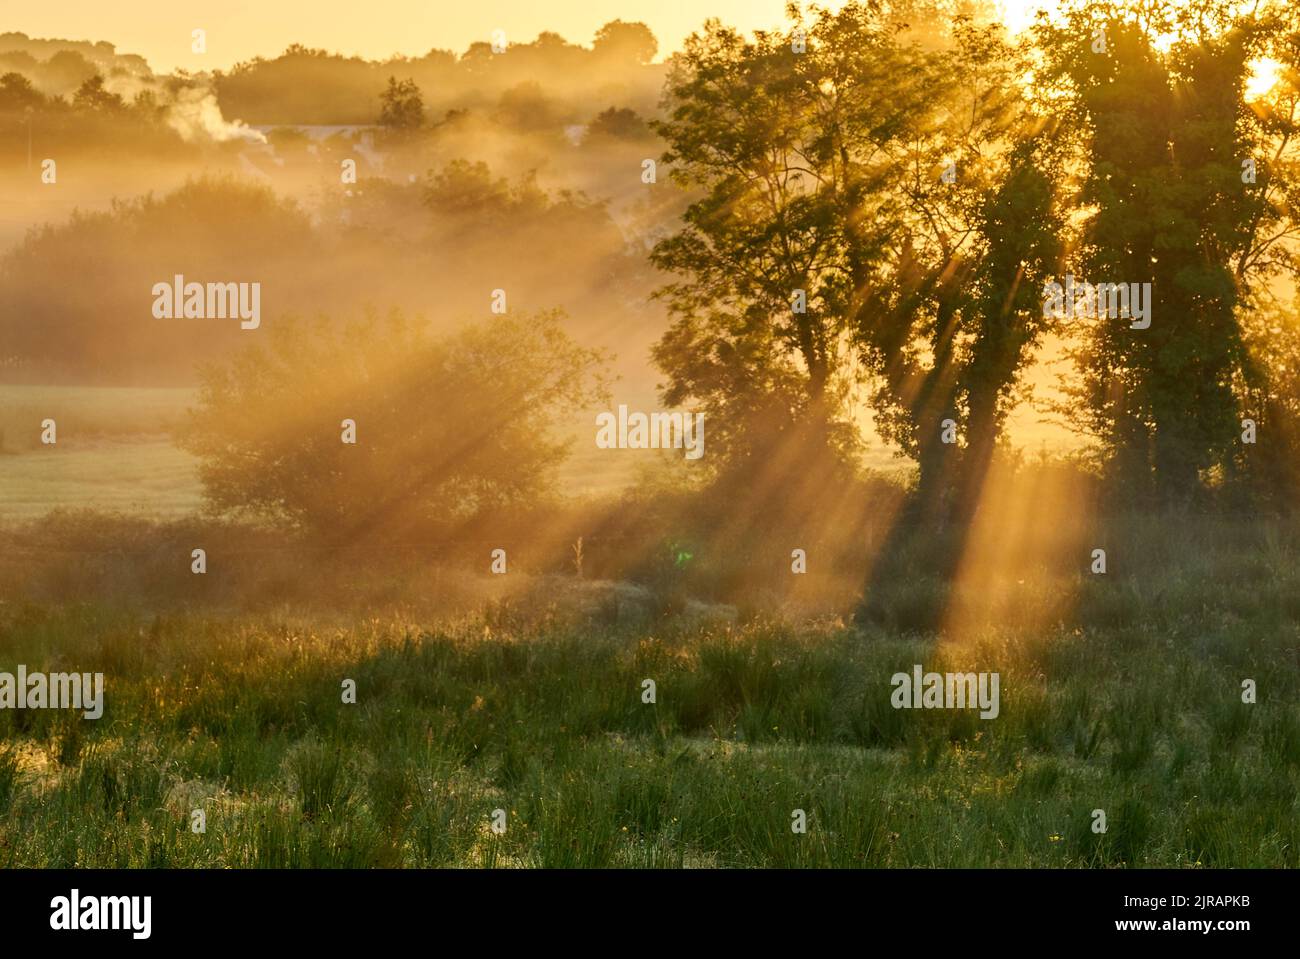 A magical sunrise through a tree on a misty morning in Ireland. Stock Photo